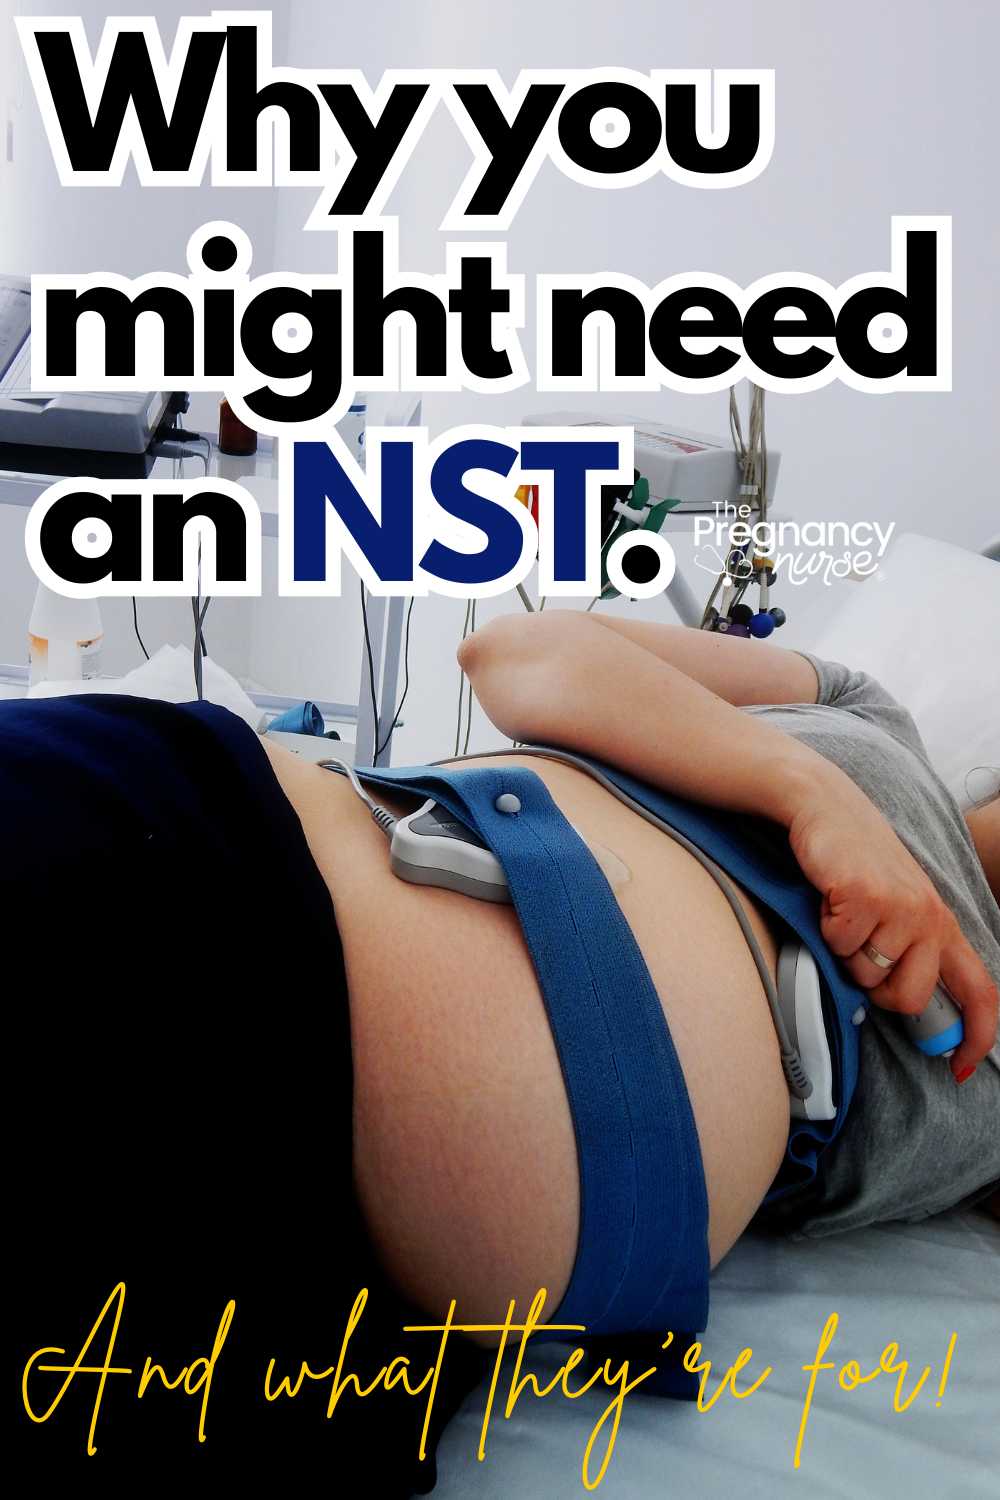 pregnant woman on a fetal monitor / why you might need an nst.